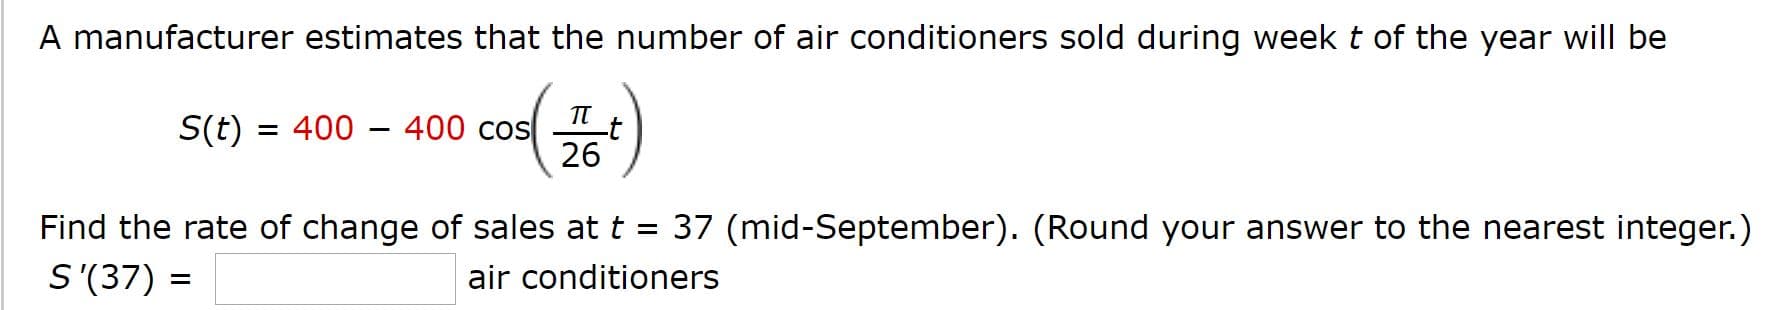 A manufacturer estimates that the number of air conditioners sold during week t of the year will be
TT
S(t) = 400 – 400 cos
26
Find the rate of change of sales at t = 37 (mid-September). (Round your answer to the nearest integer.)
S'(37) =
air conditioners
%3D
